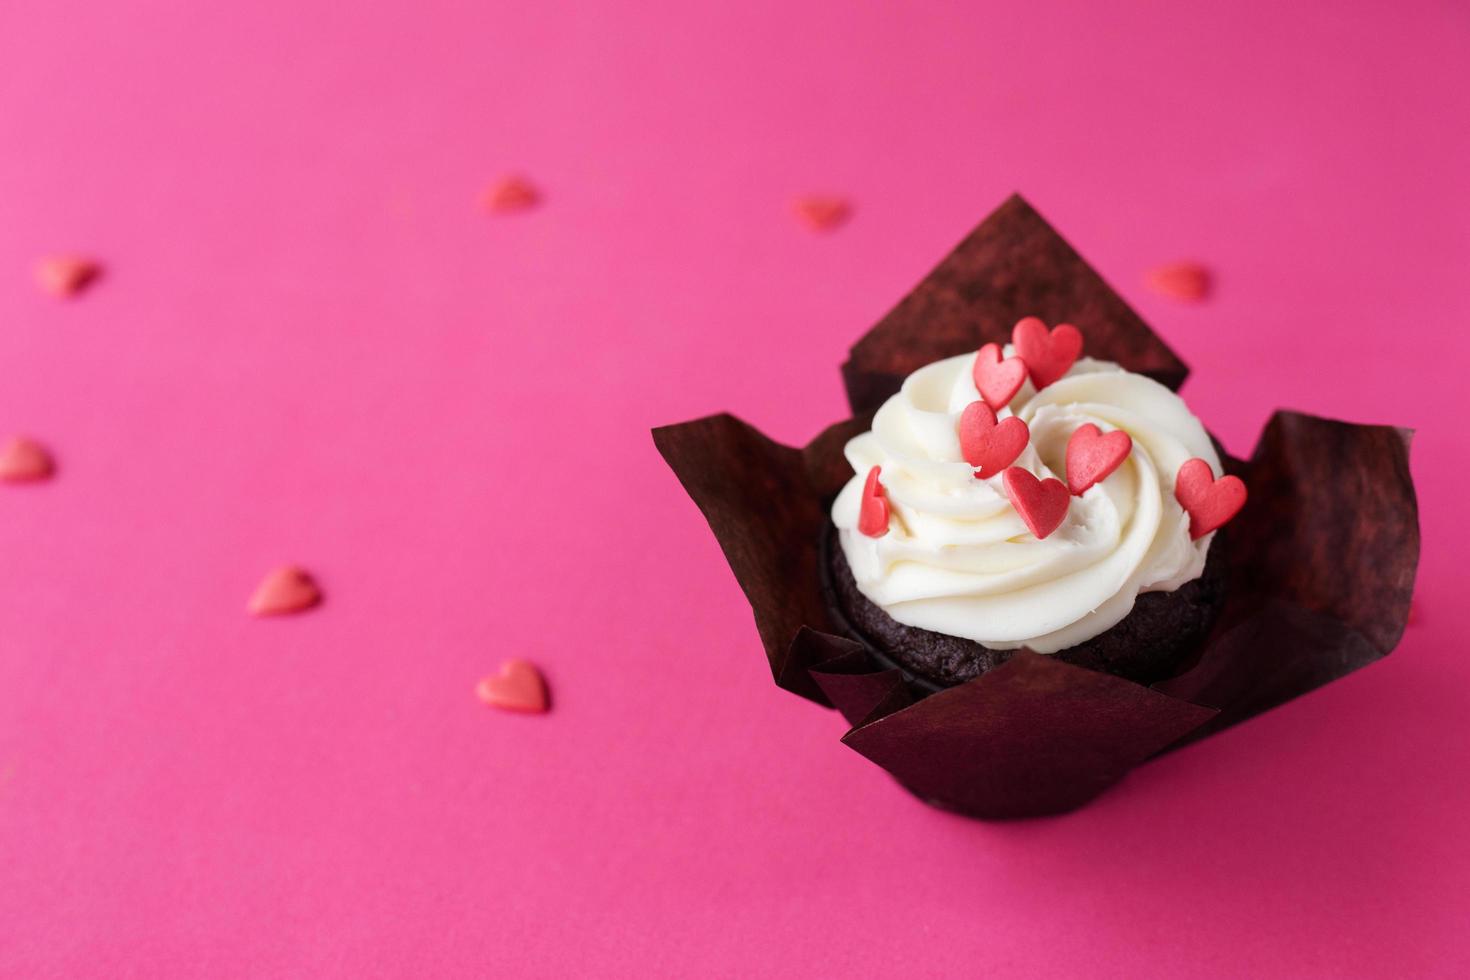 Red velvet cupcakes for Valentines Day in bright pink setting photo